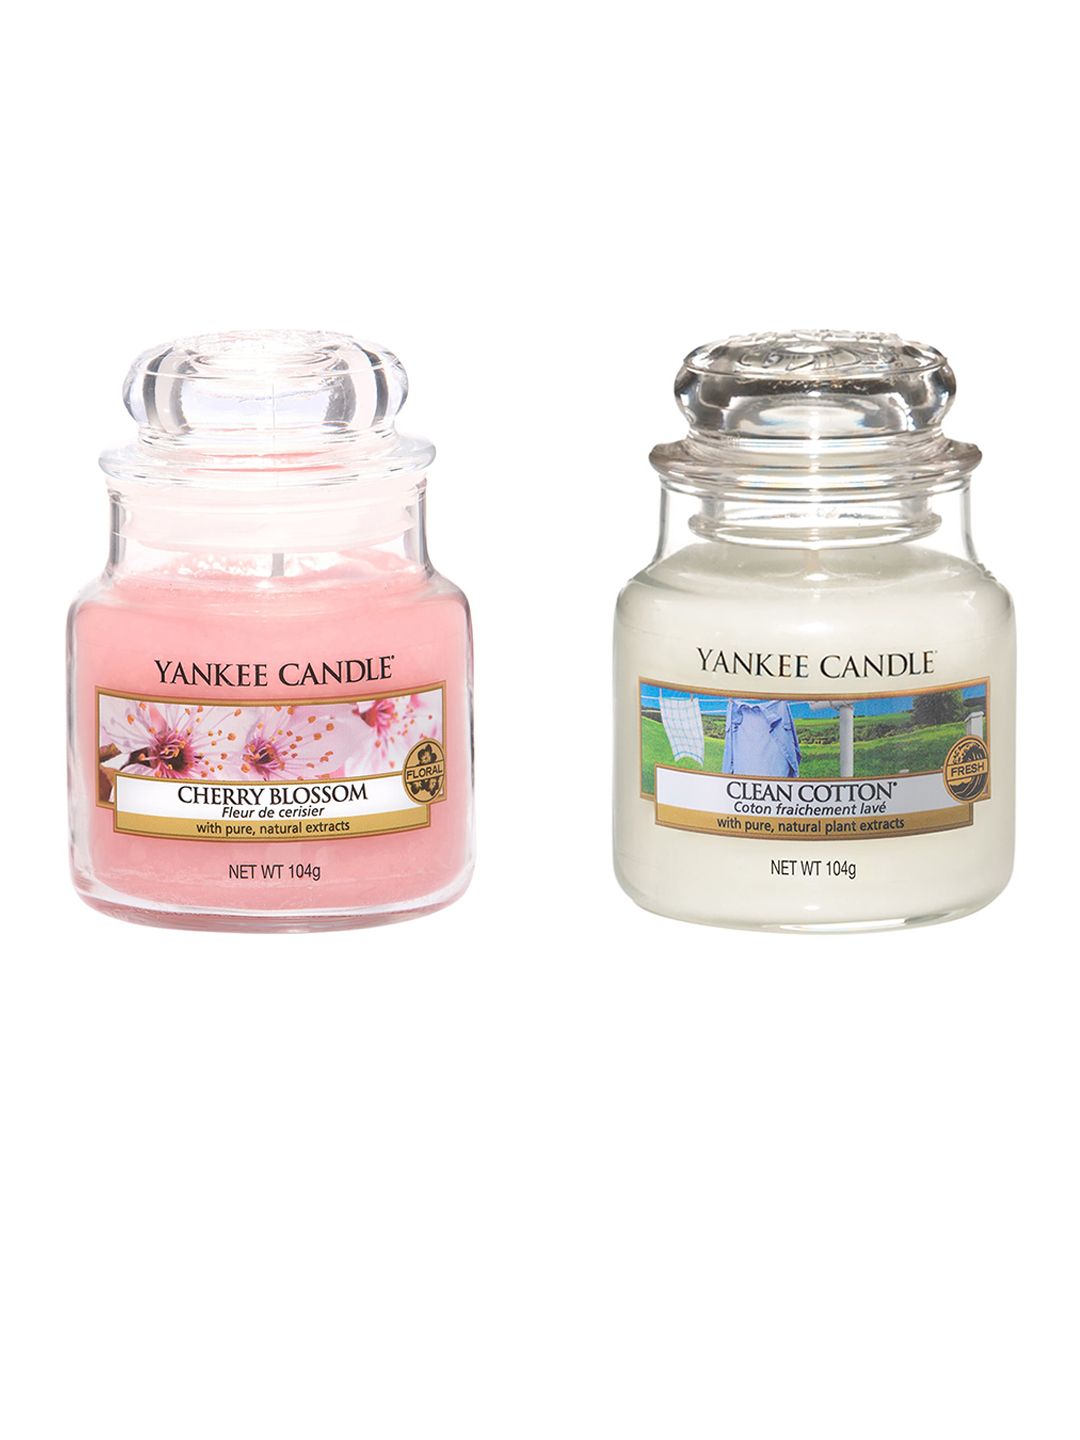 YANKEE CANDLE Set of 2 Pink & Off-white Cherry Blossom and Clean Cotton Classic Jar Scented Candles Price in India